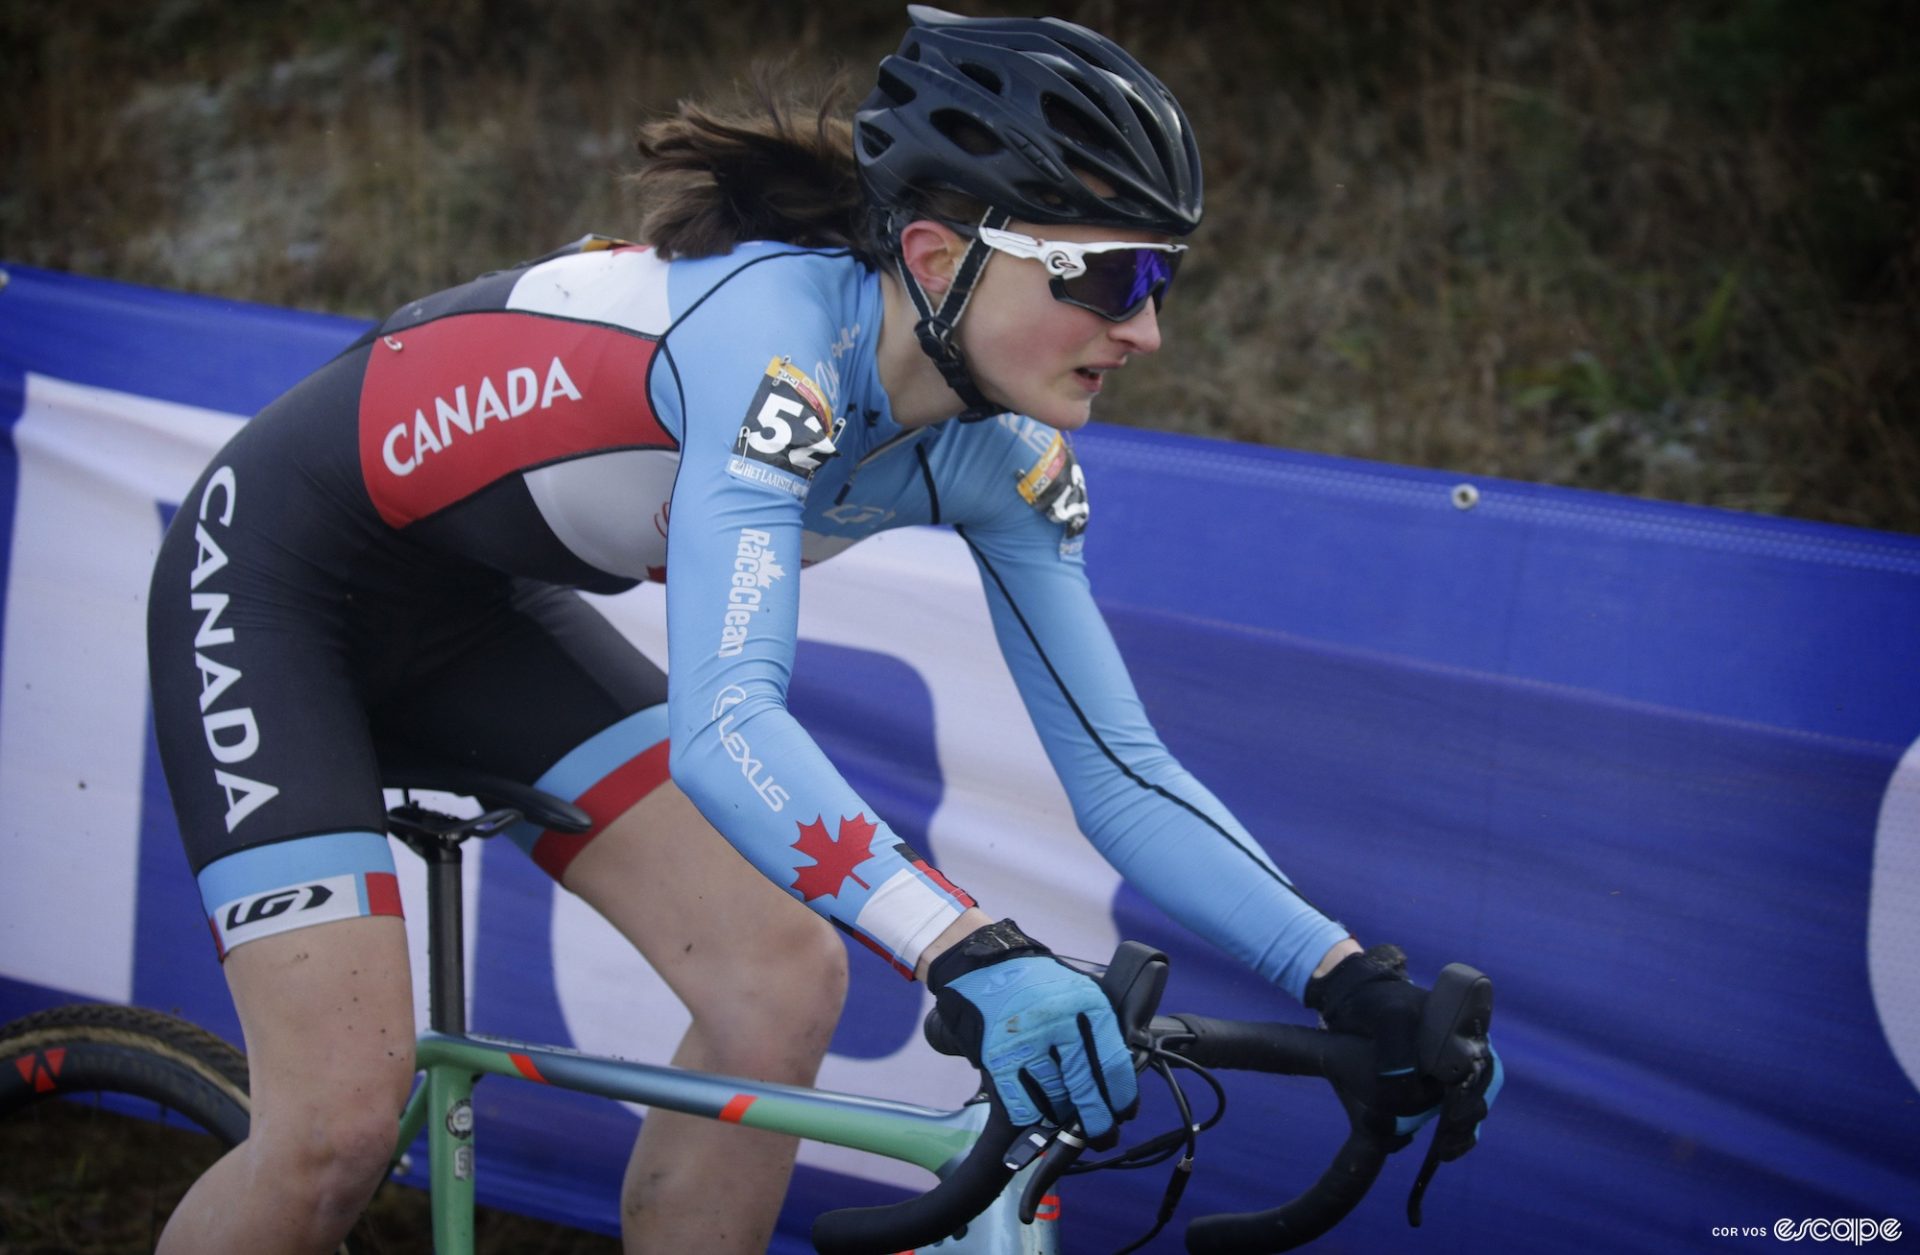 Vallieres racing the cyclocross world championships while representing Canada. 